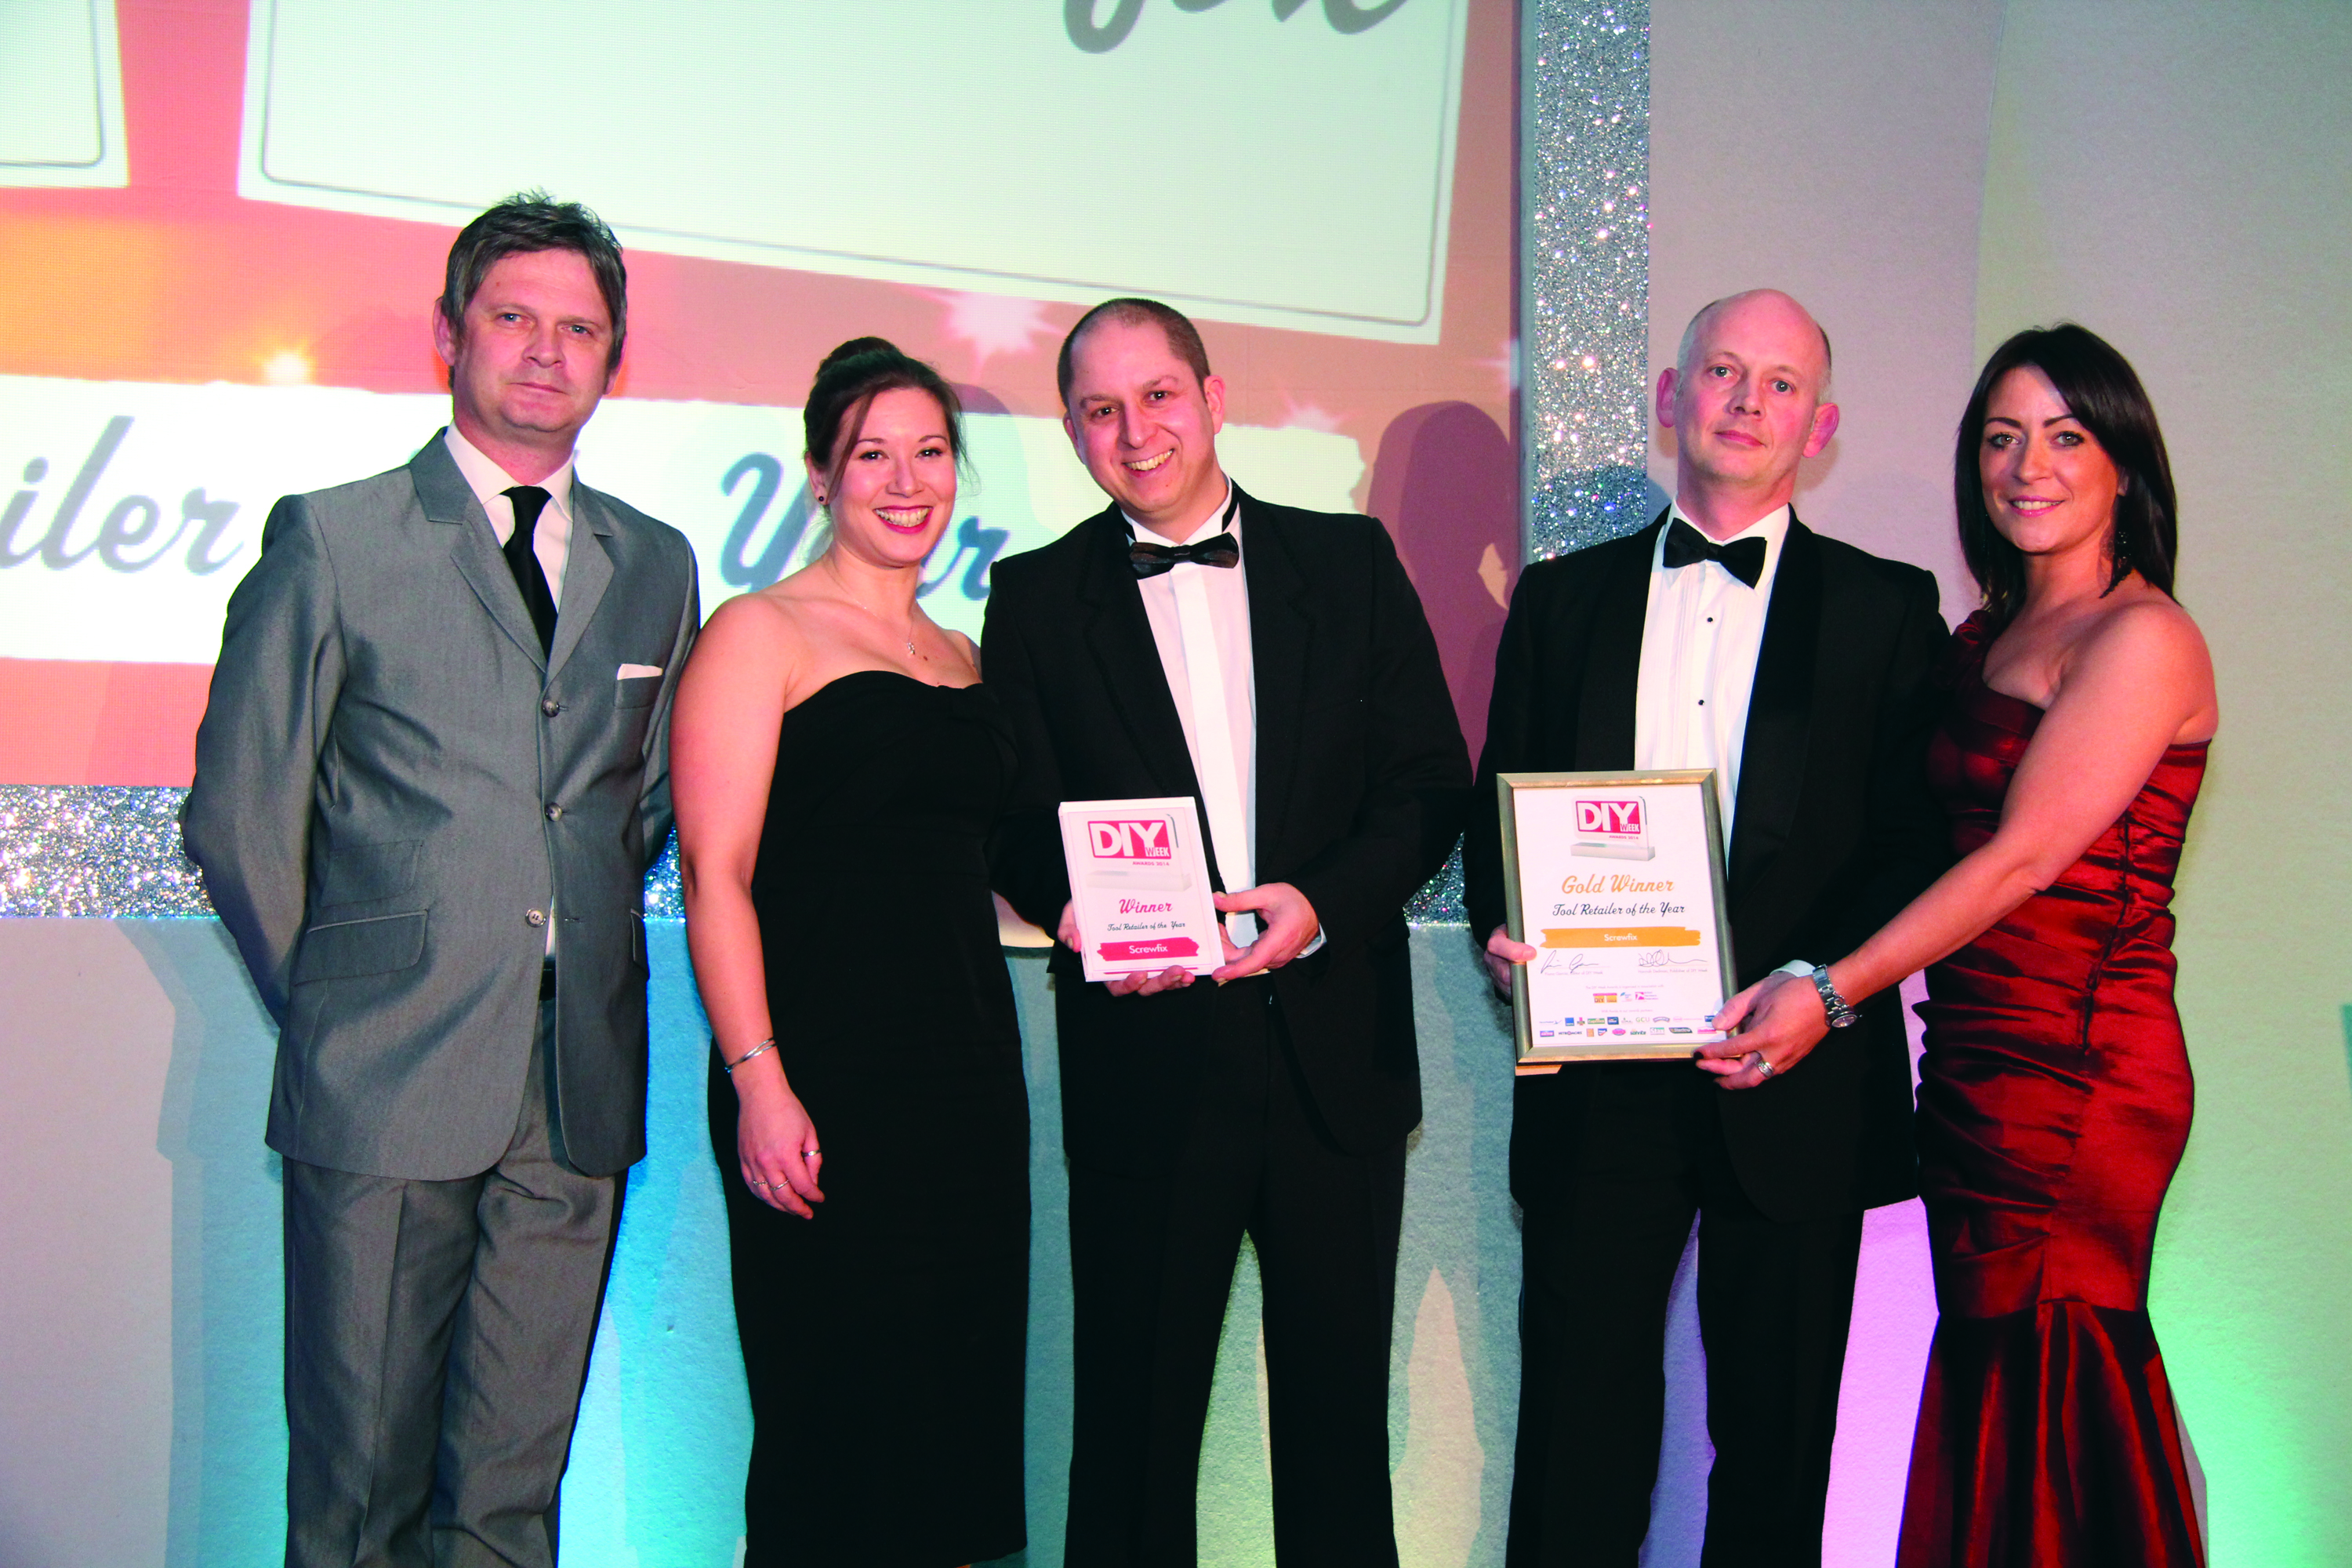 Screwfix celebrates being crowned ‘Tool Retailer of the Year’